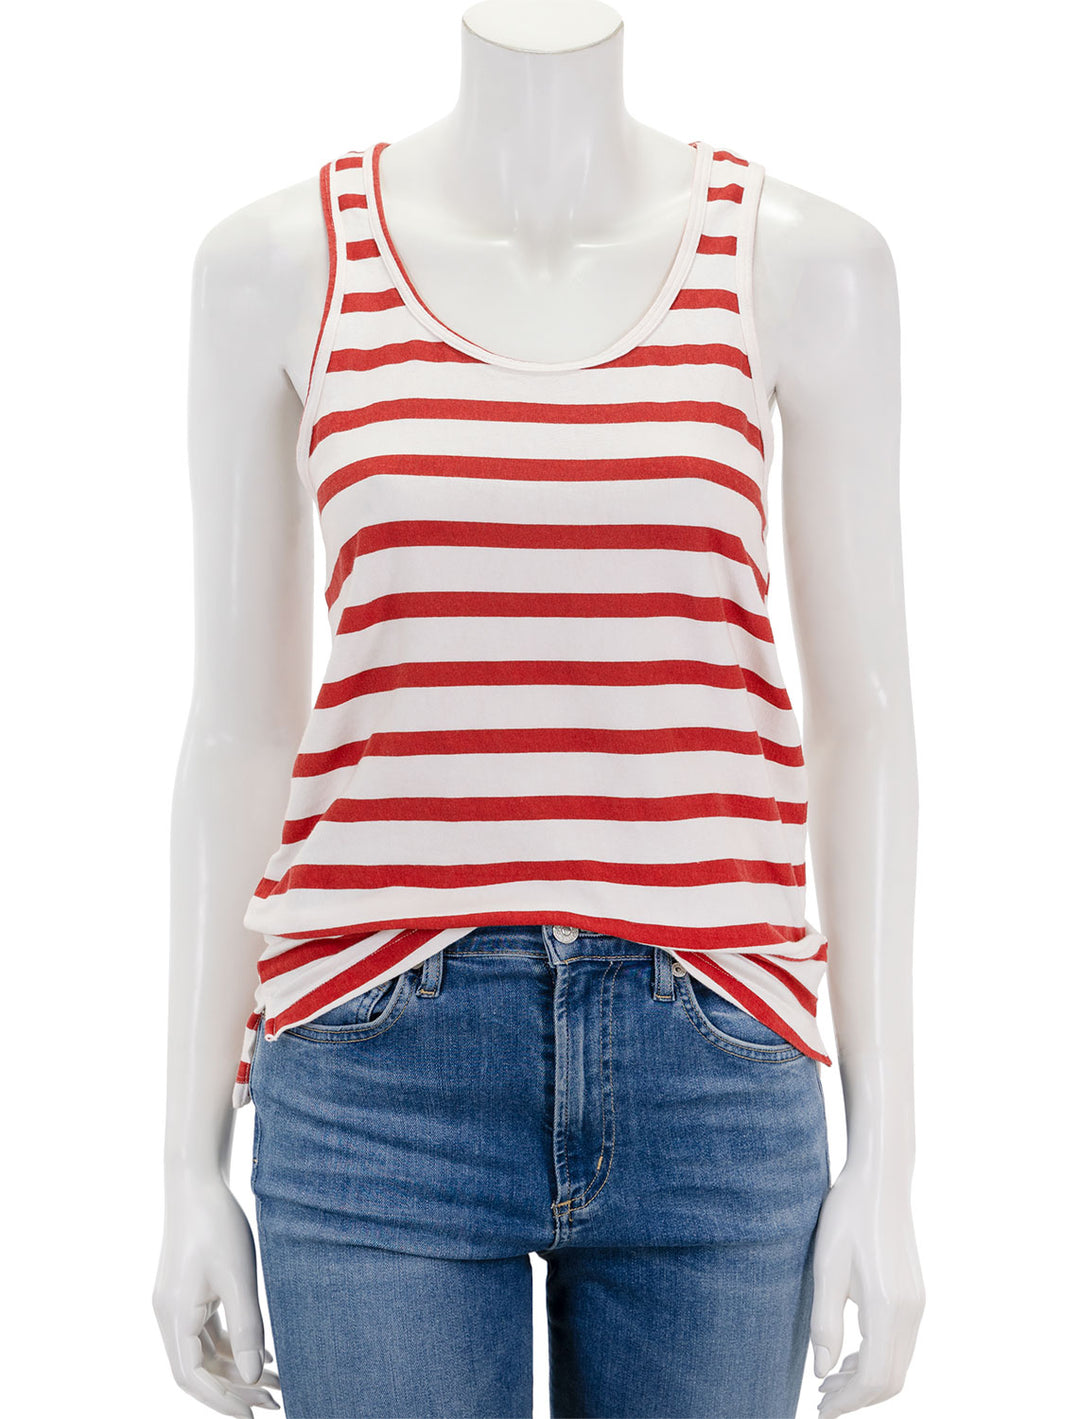 Front view of ASKK NY's printed tank in red and white stripe.